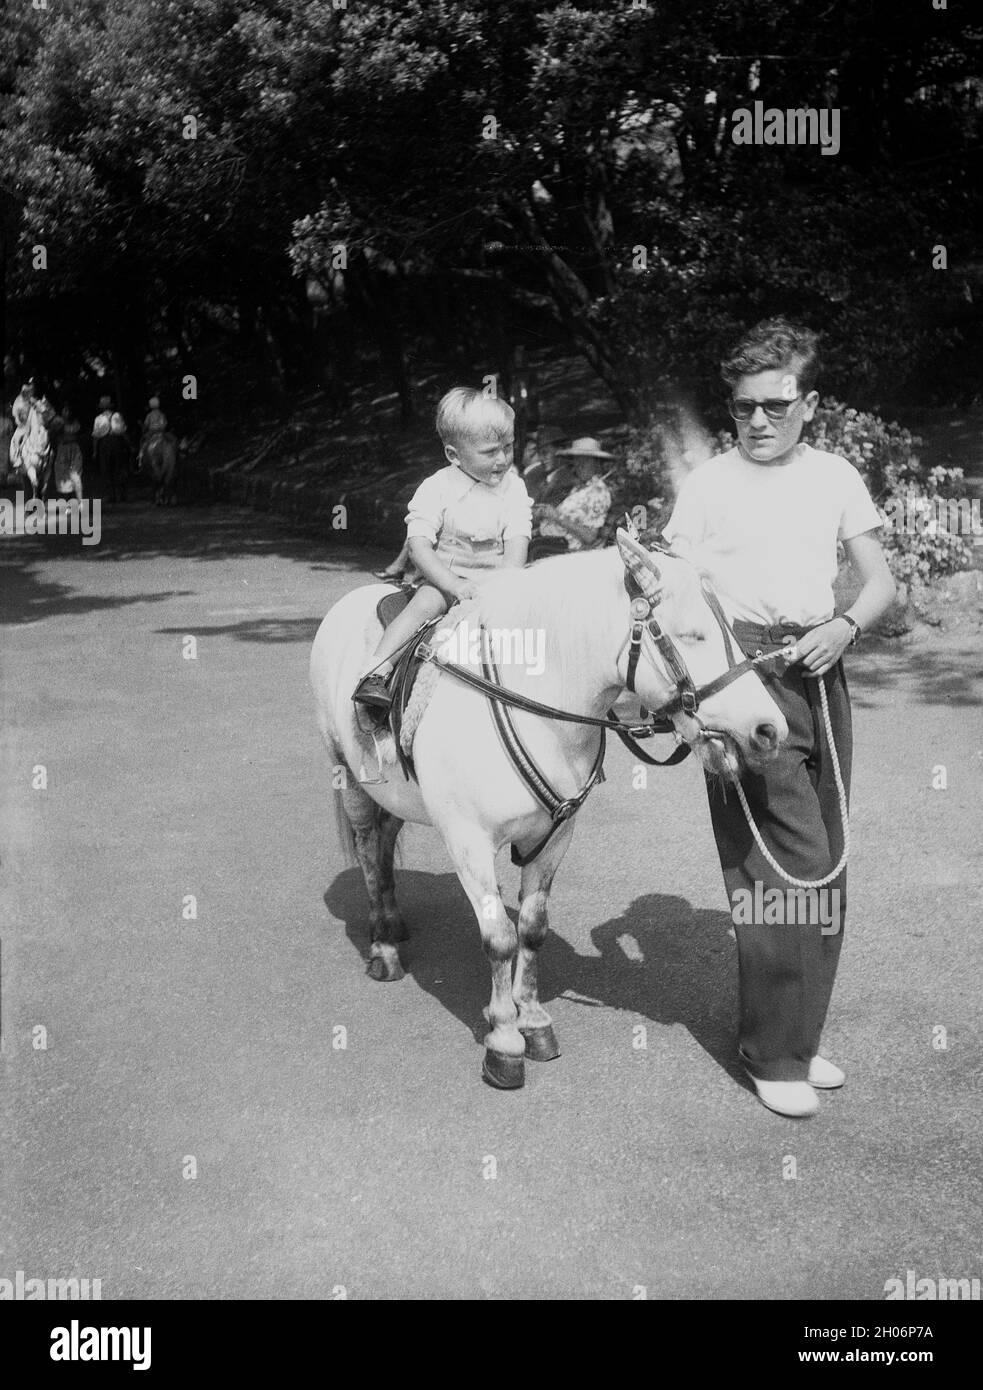 1950s, historical, summertime and a little boy having a pony ride, England, UK. Stock Photo